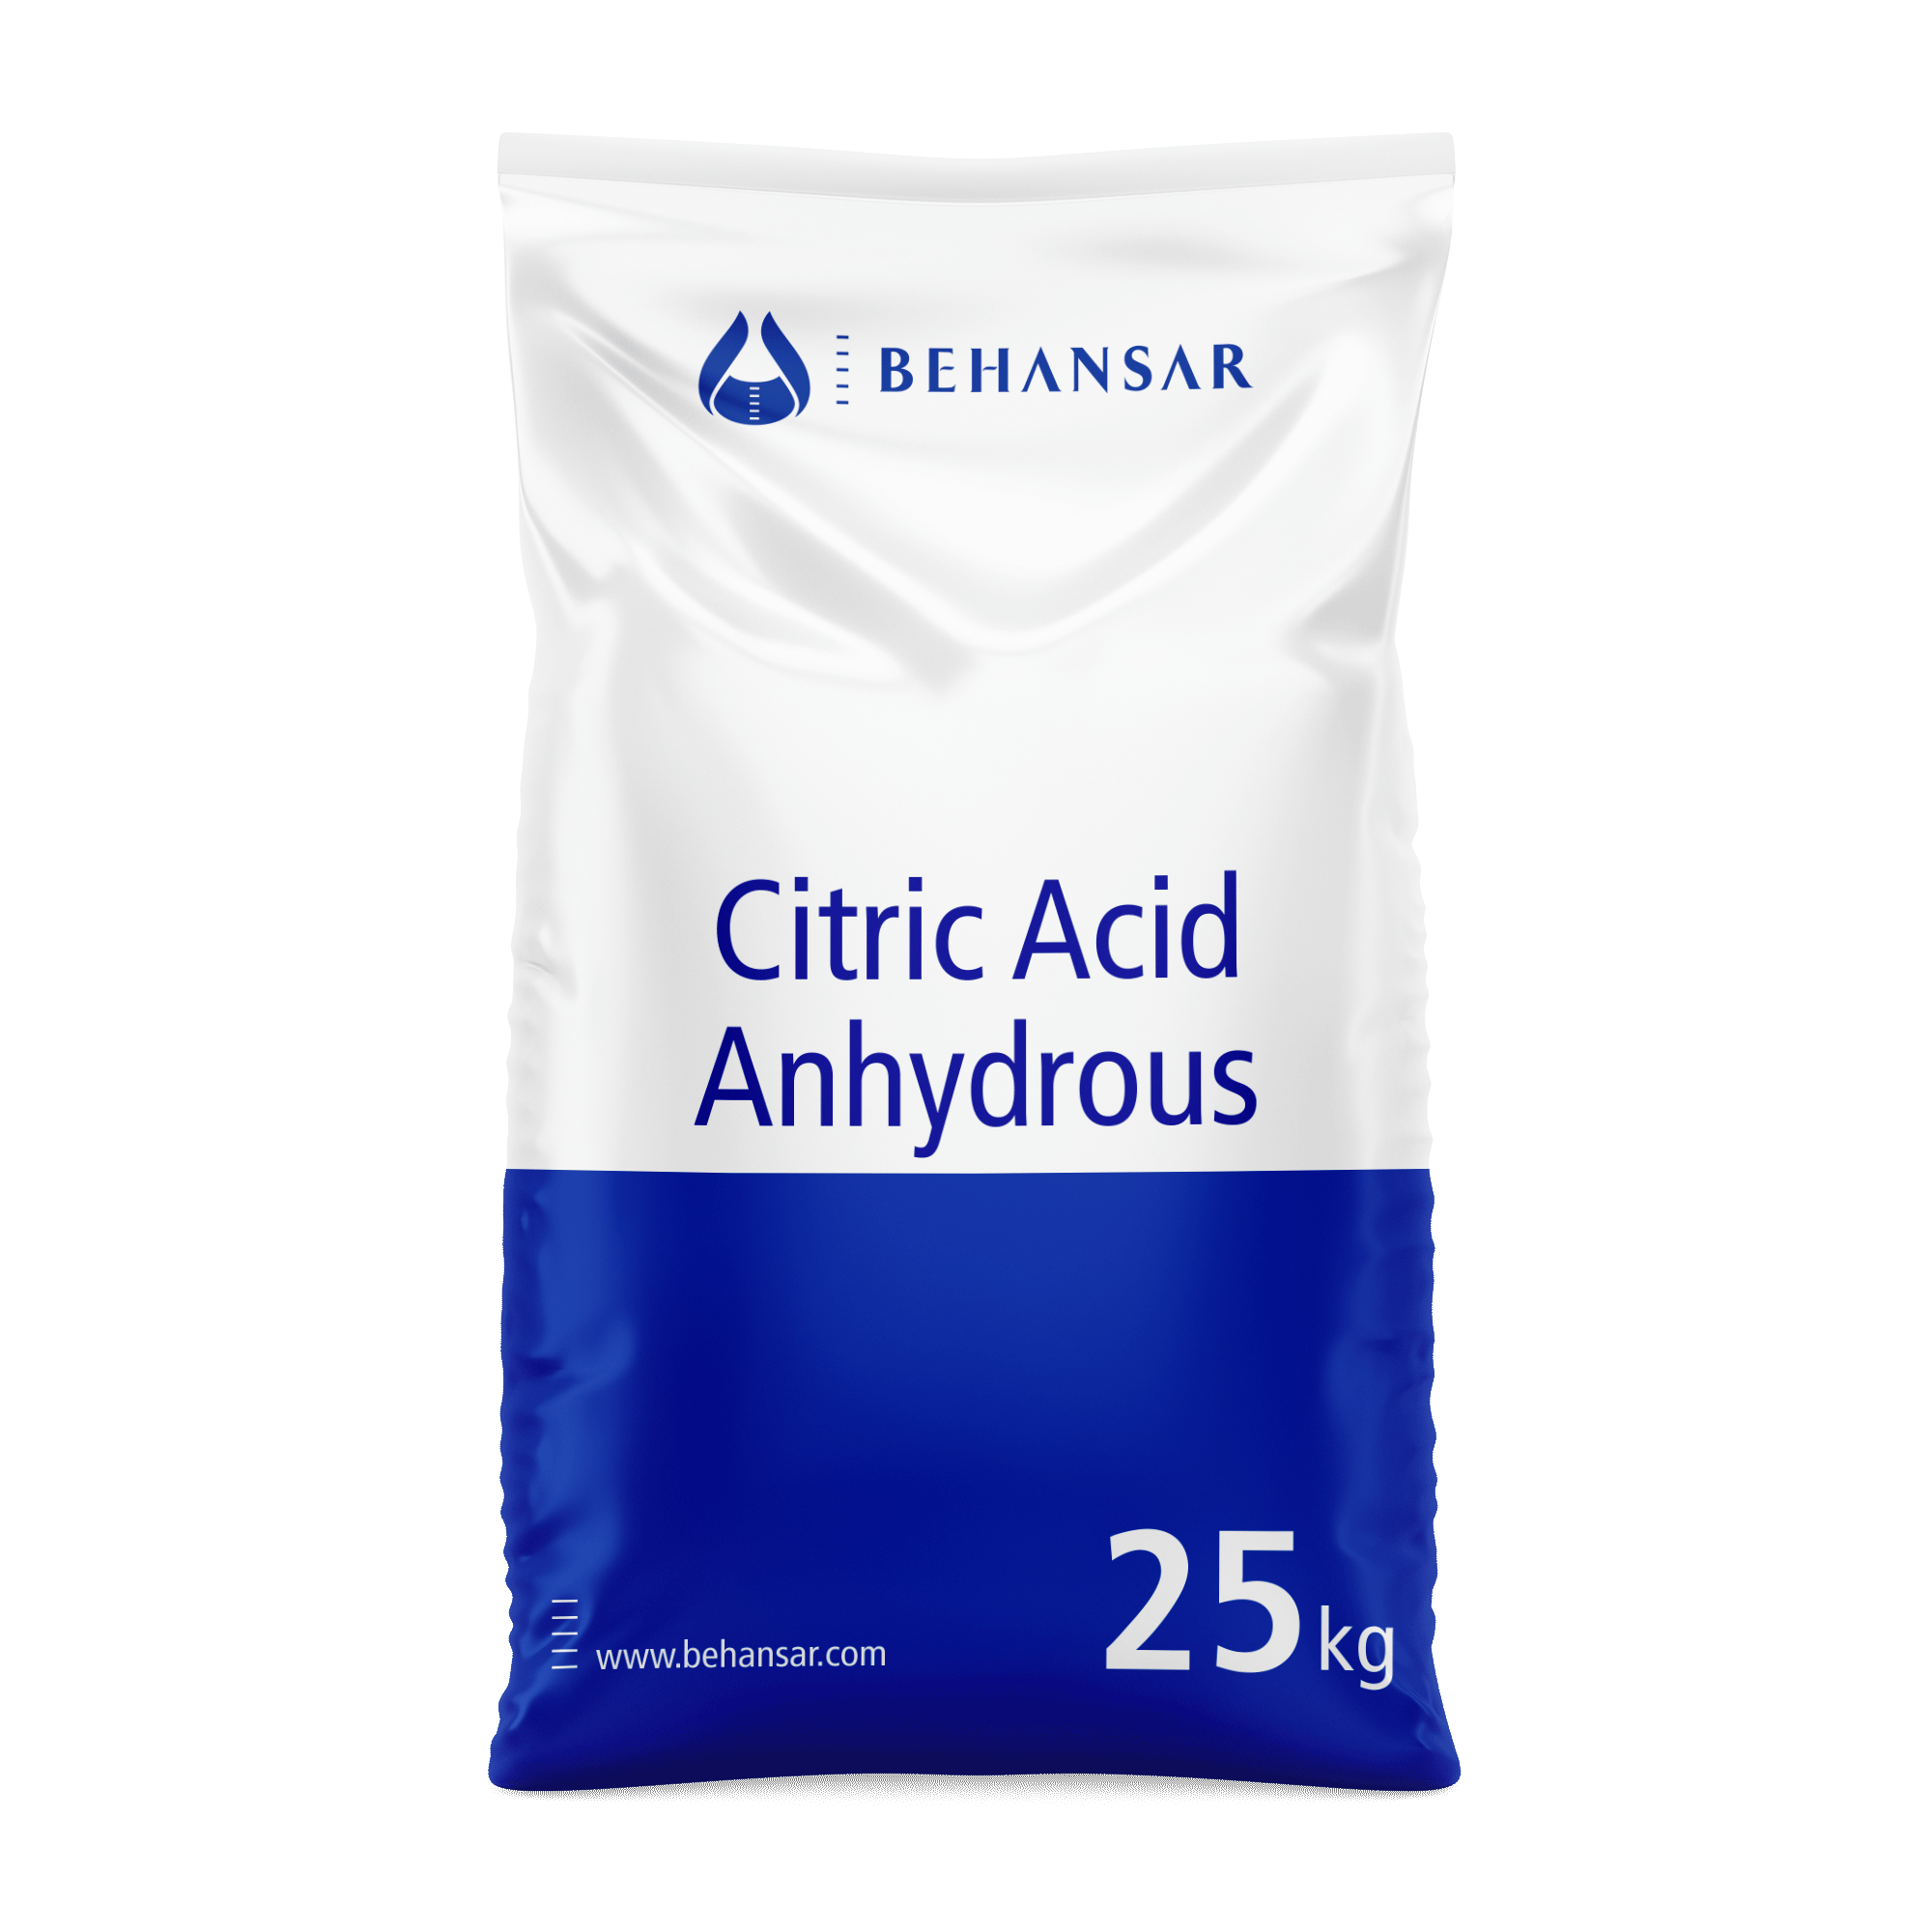 Citric Acid Anhydrous is one of the products of Behansar Co